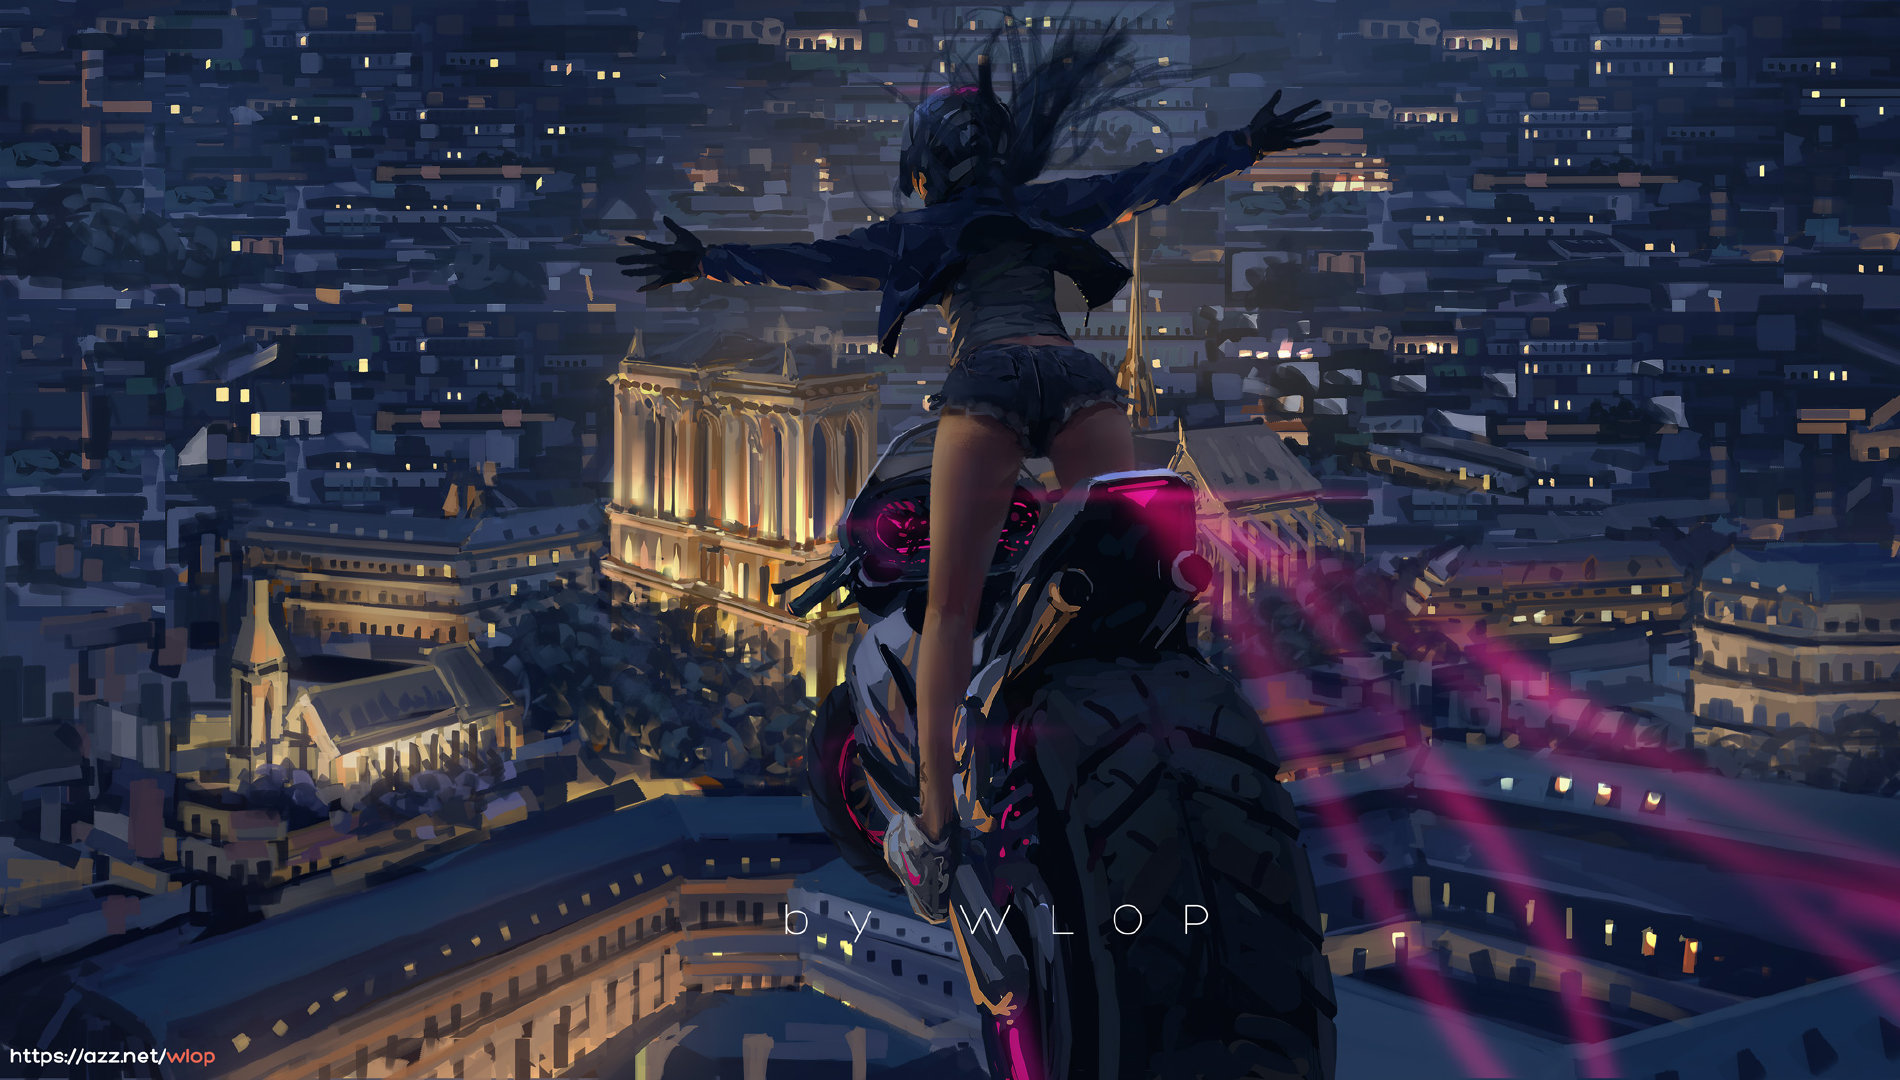 General 1900x1080 anime girls artwork WLOP flying cityscape motorcycle watermarked